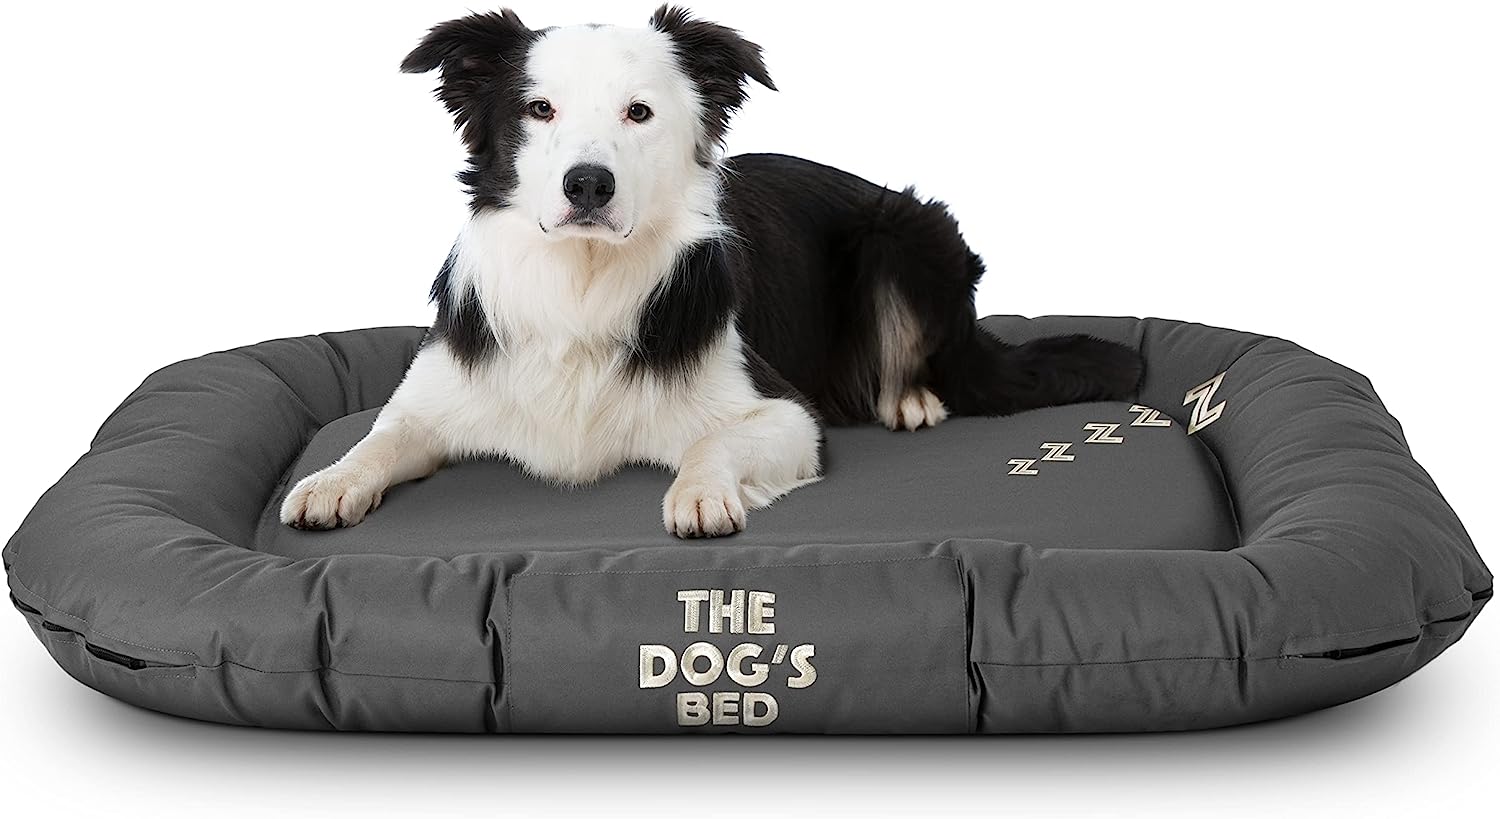 The Dog's Bed Utility Waterproof Dog Bed